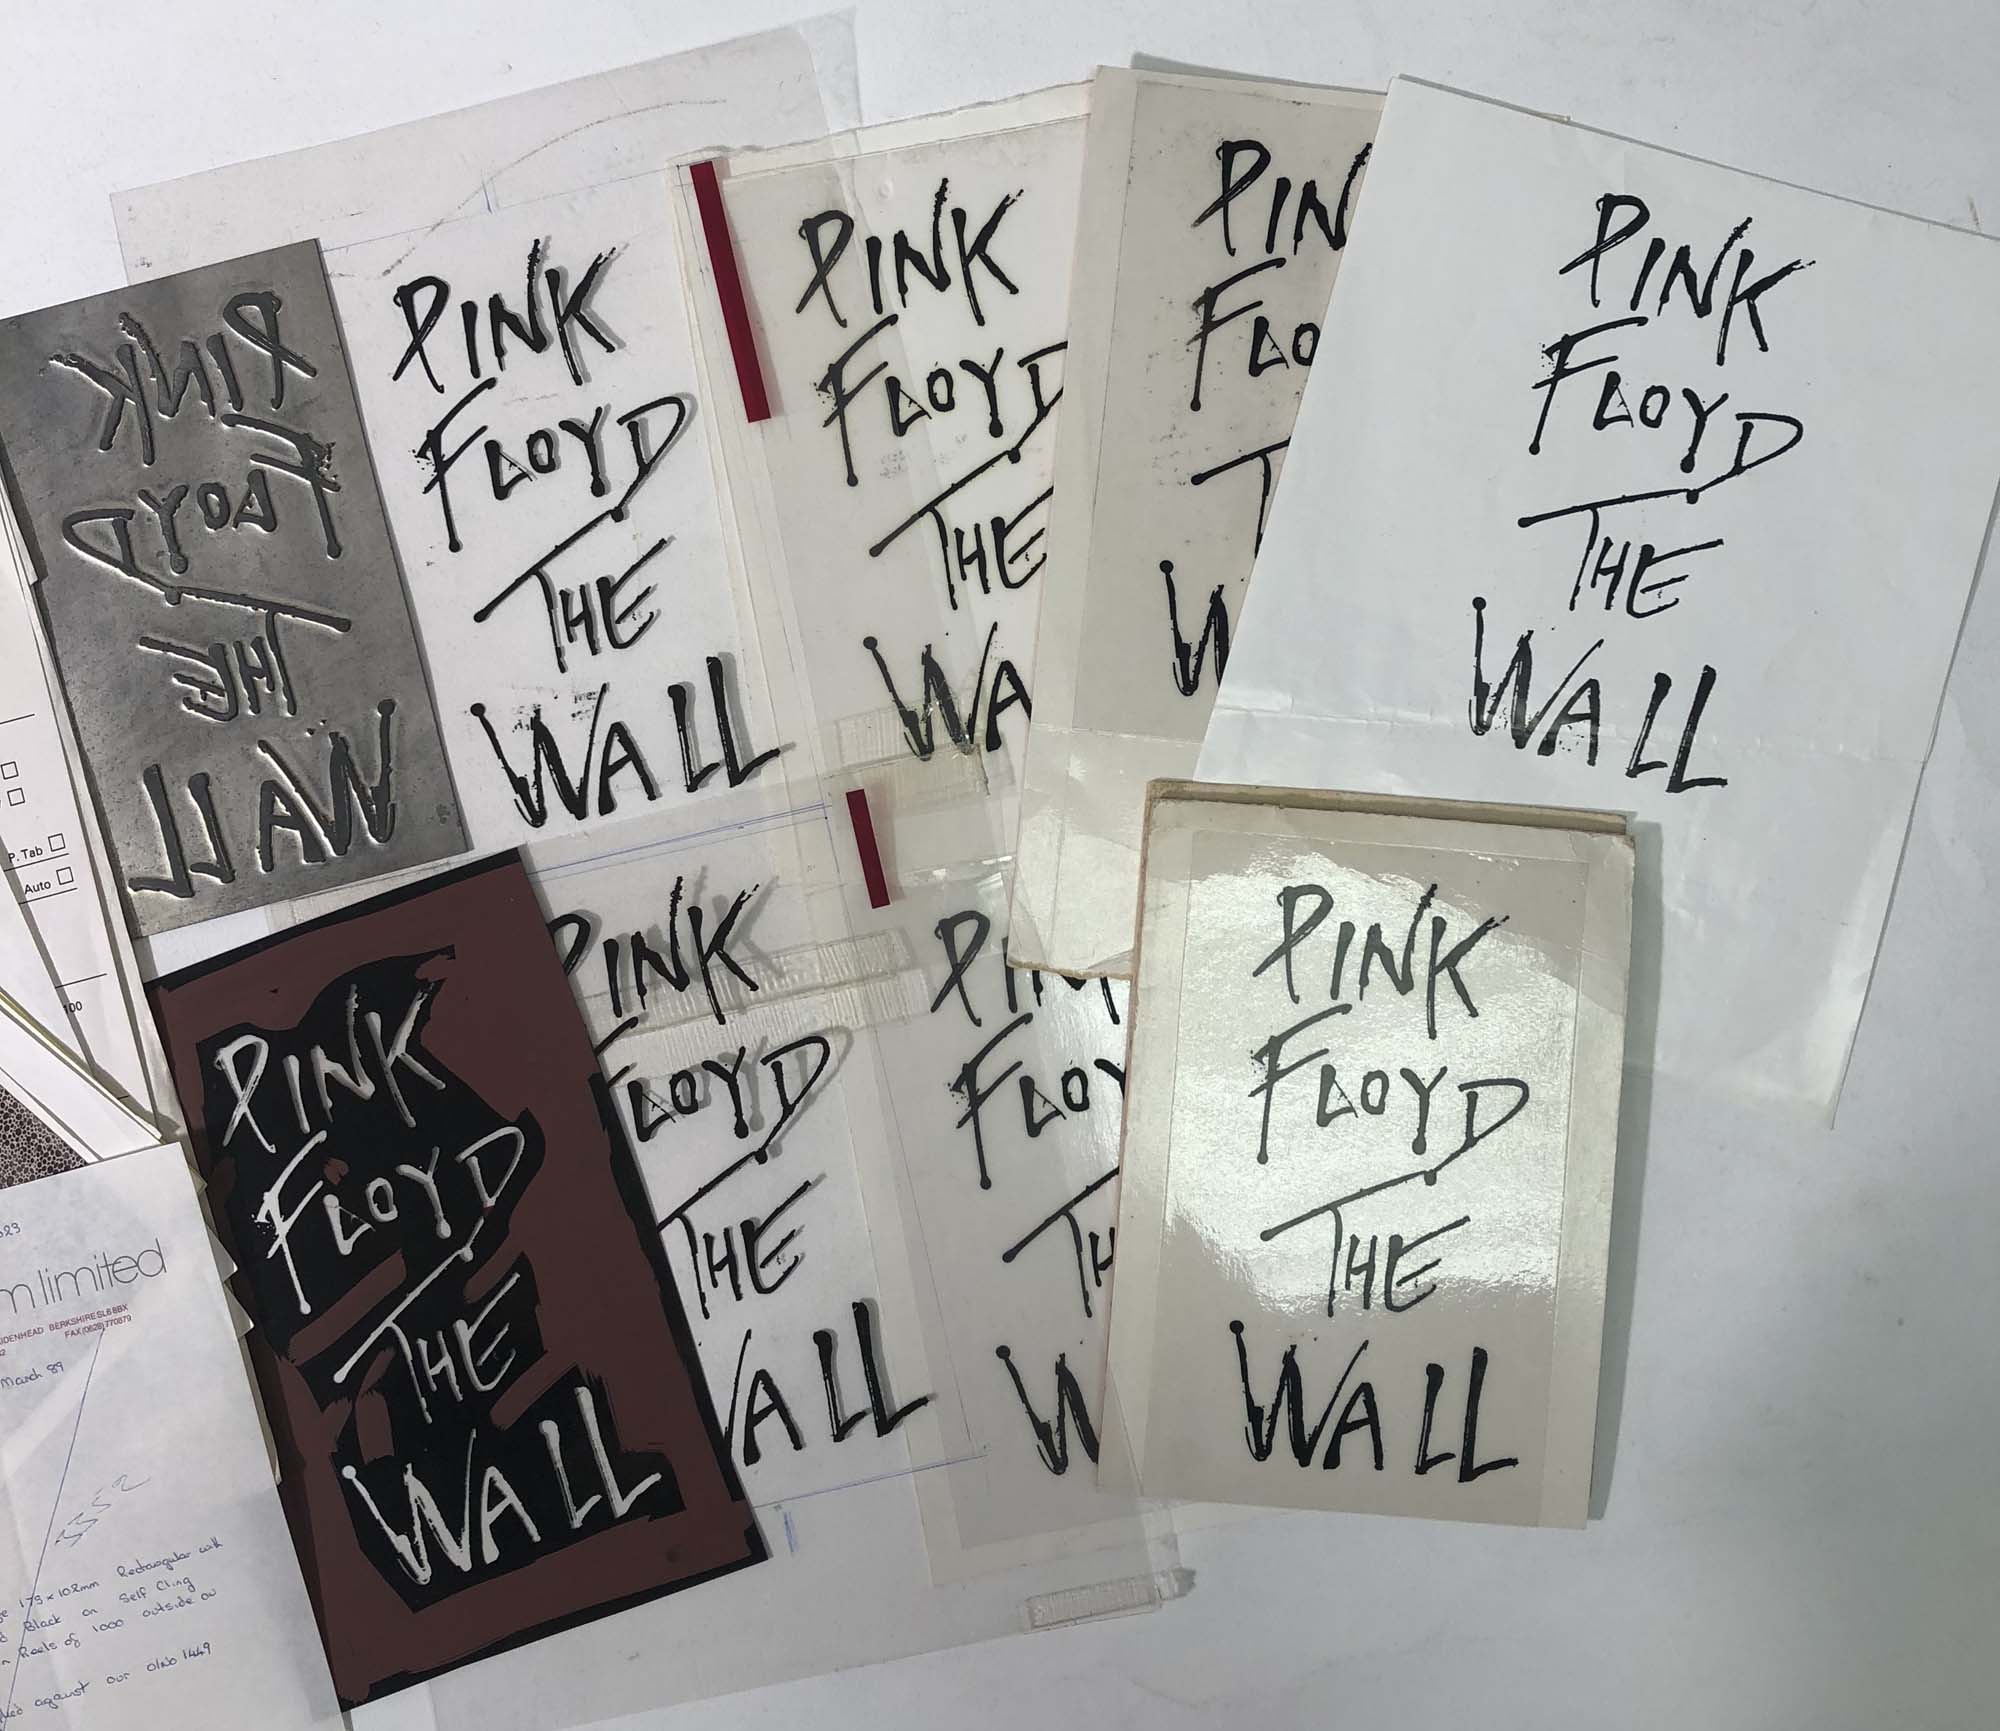 PINK FLOYD THE WALL ORIGINAL ARTWORK STAMPS & STENCILS. - Image 2 of 4